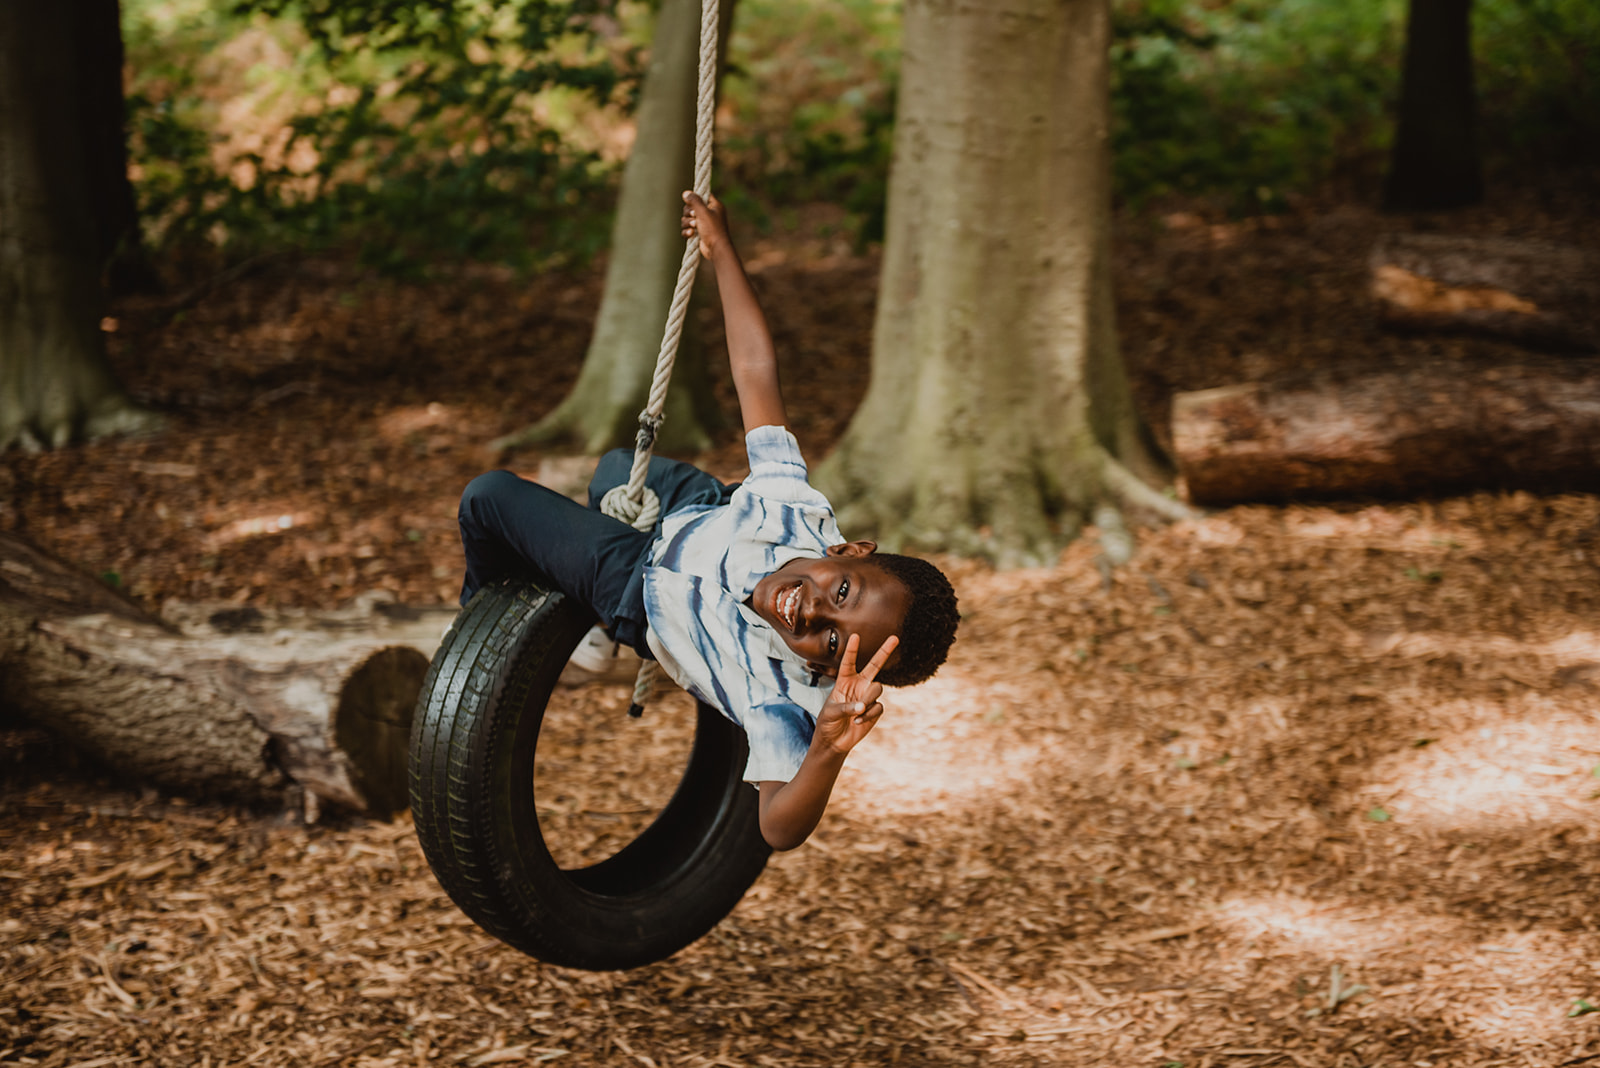 A child swings on a tire during a wedding at Happy Valley Norfolk